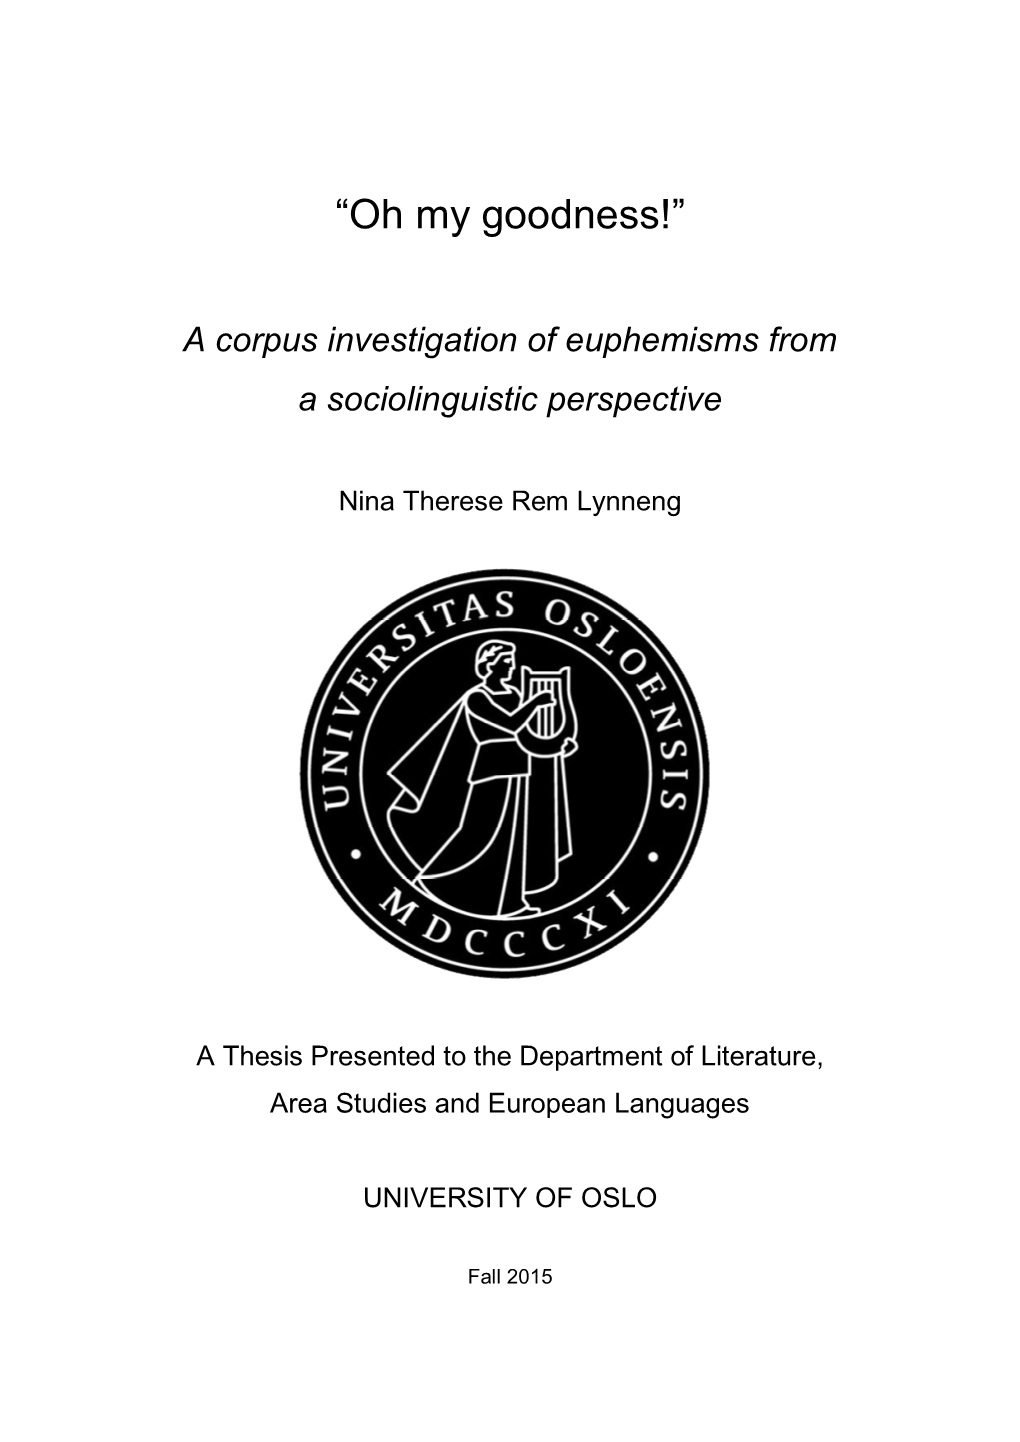 “Oh My Goodness!” a Corpus Investigation of Euphemisms from a Sociolinguistic Perspective